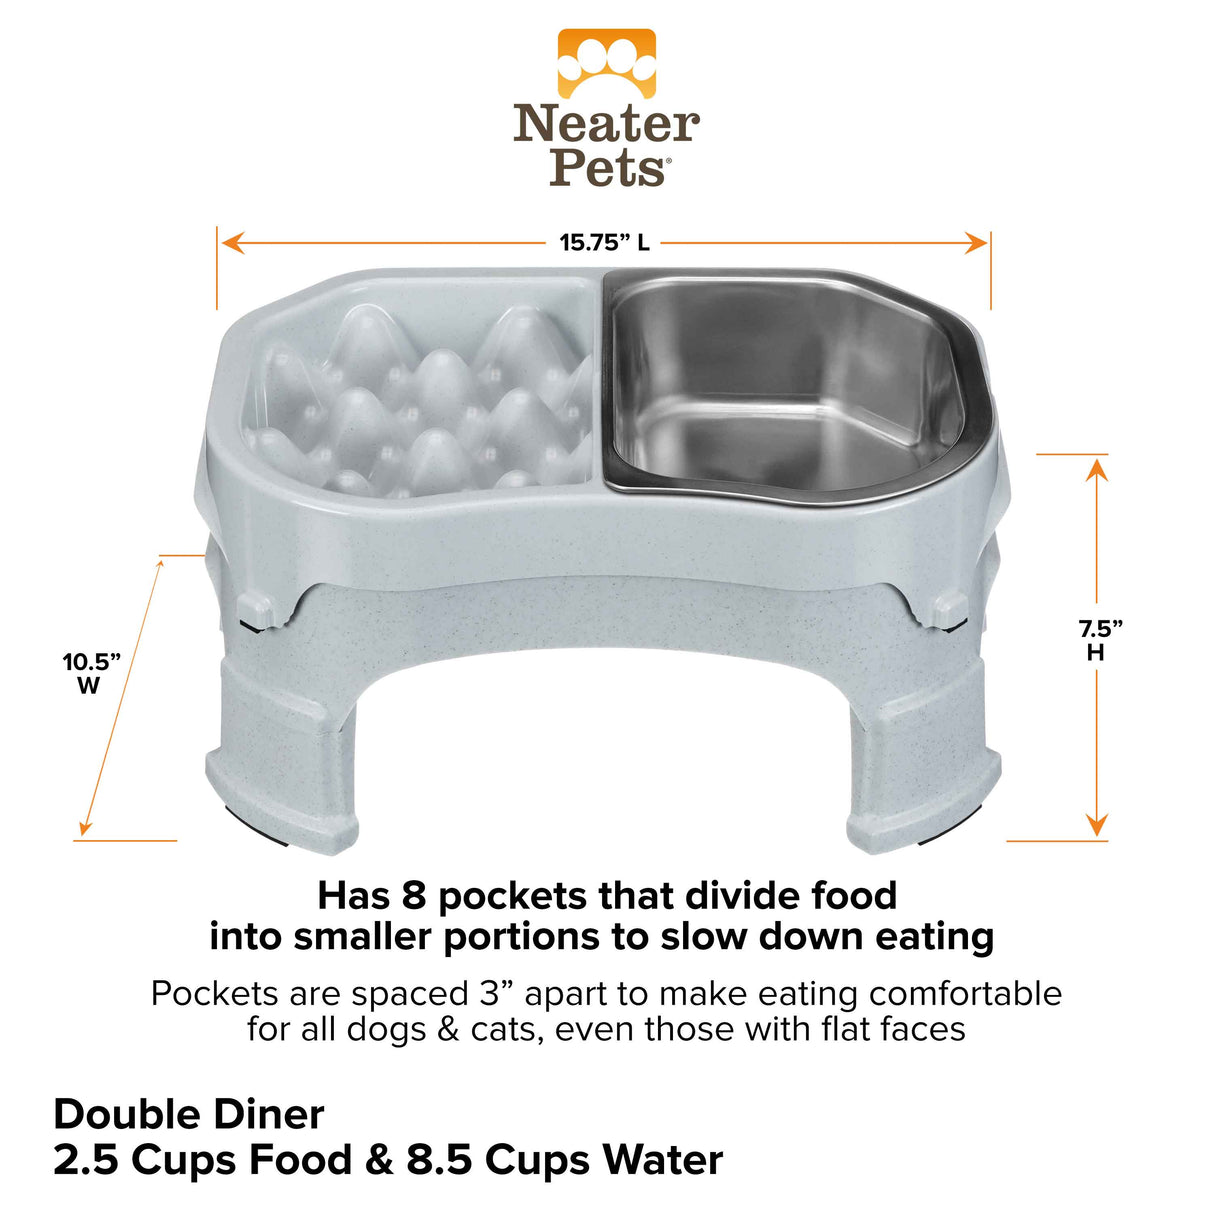 Raised Double Diner dimensions